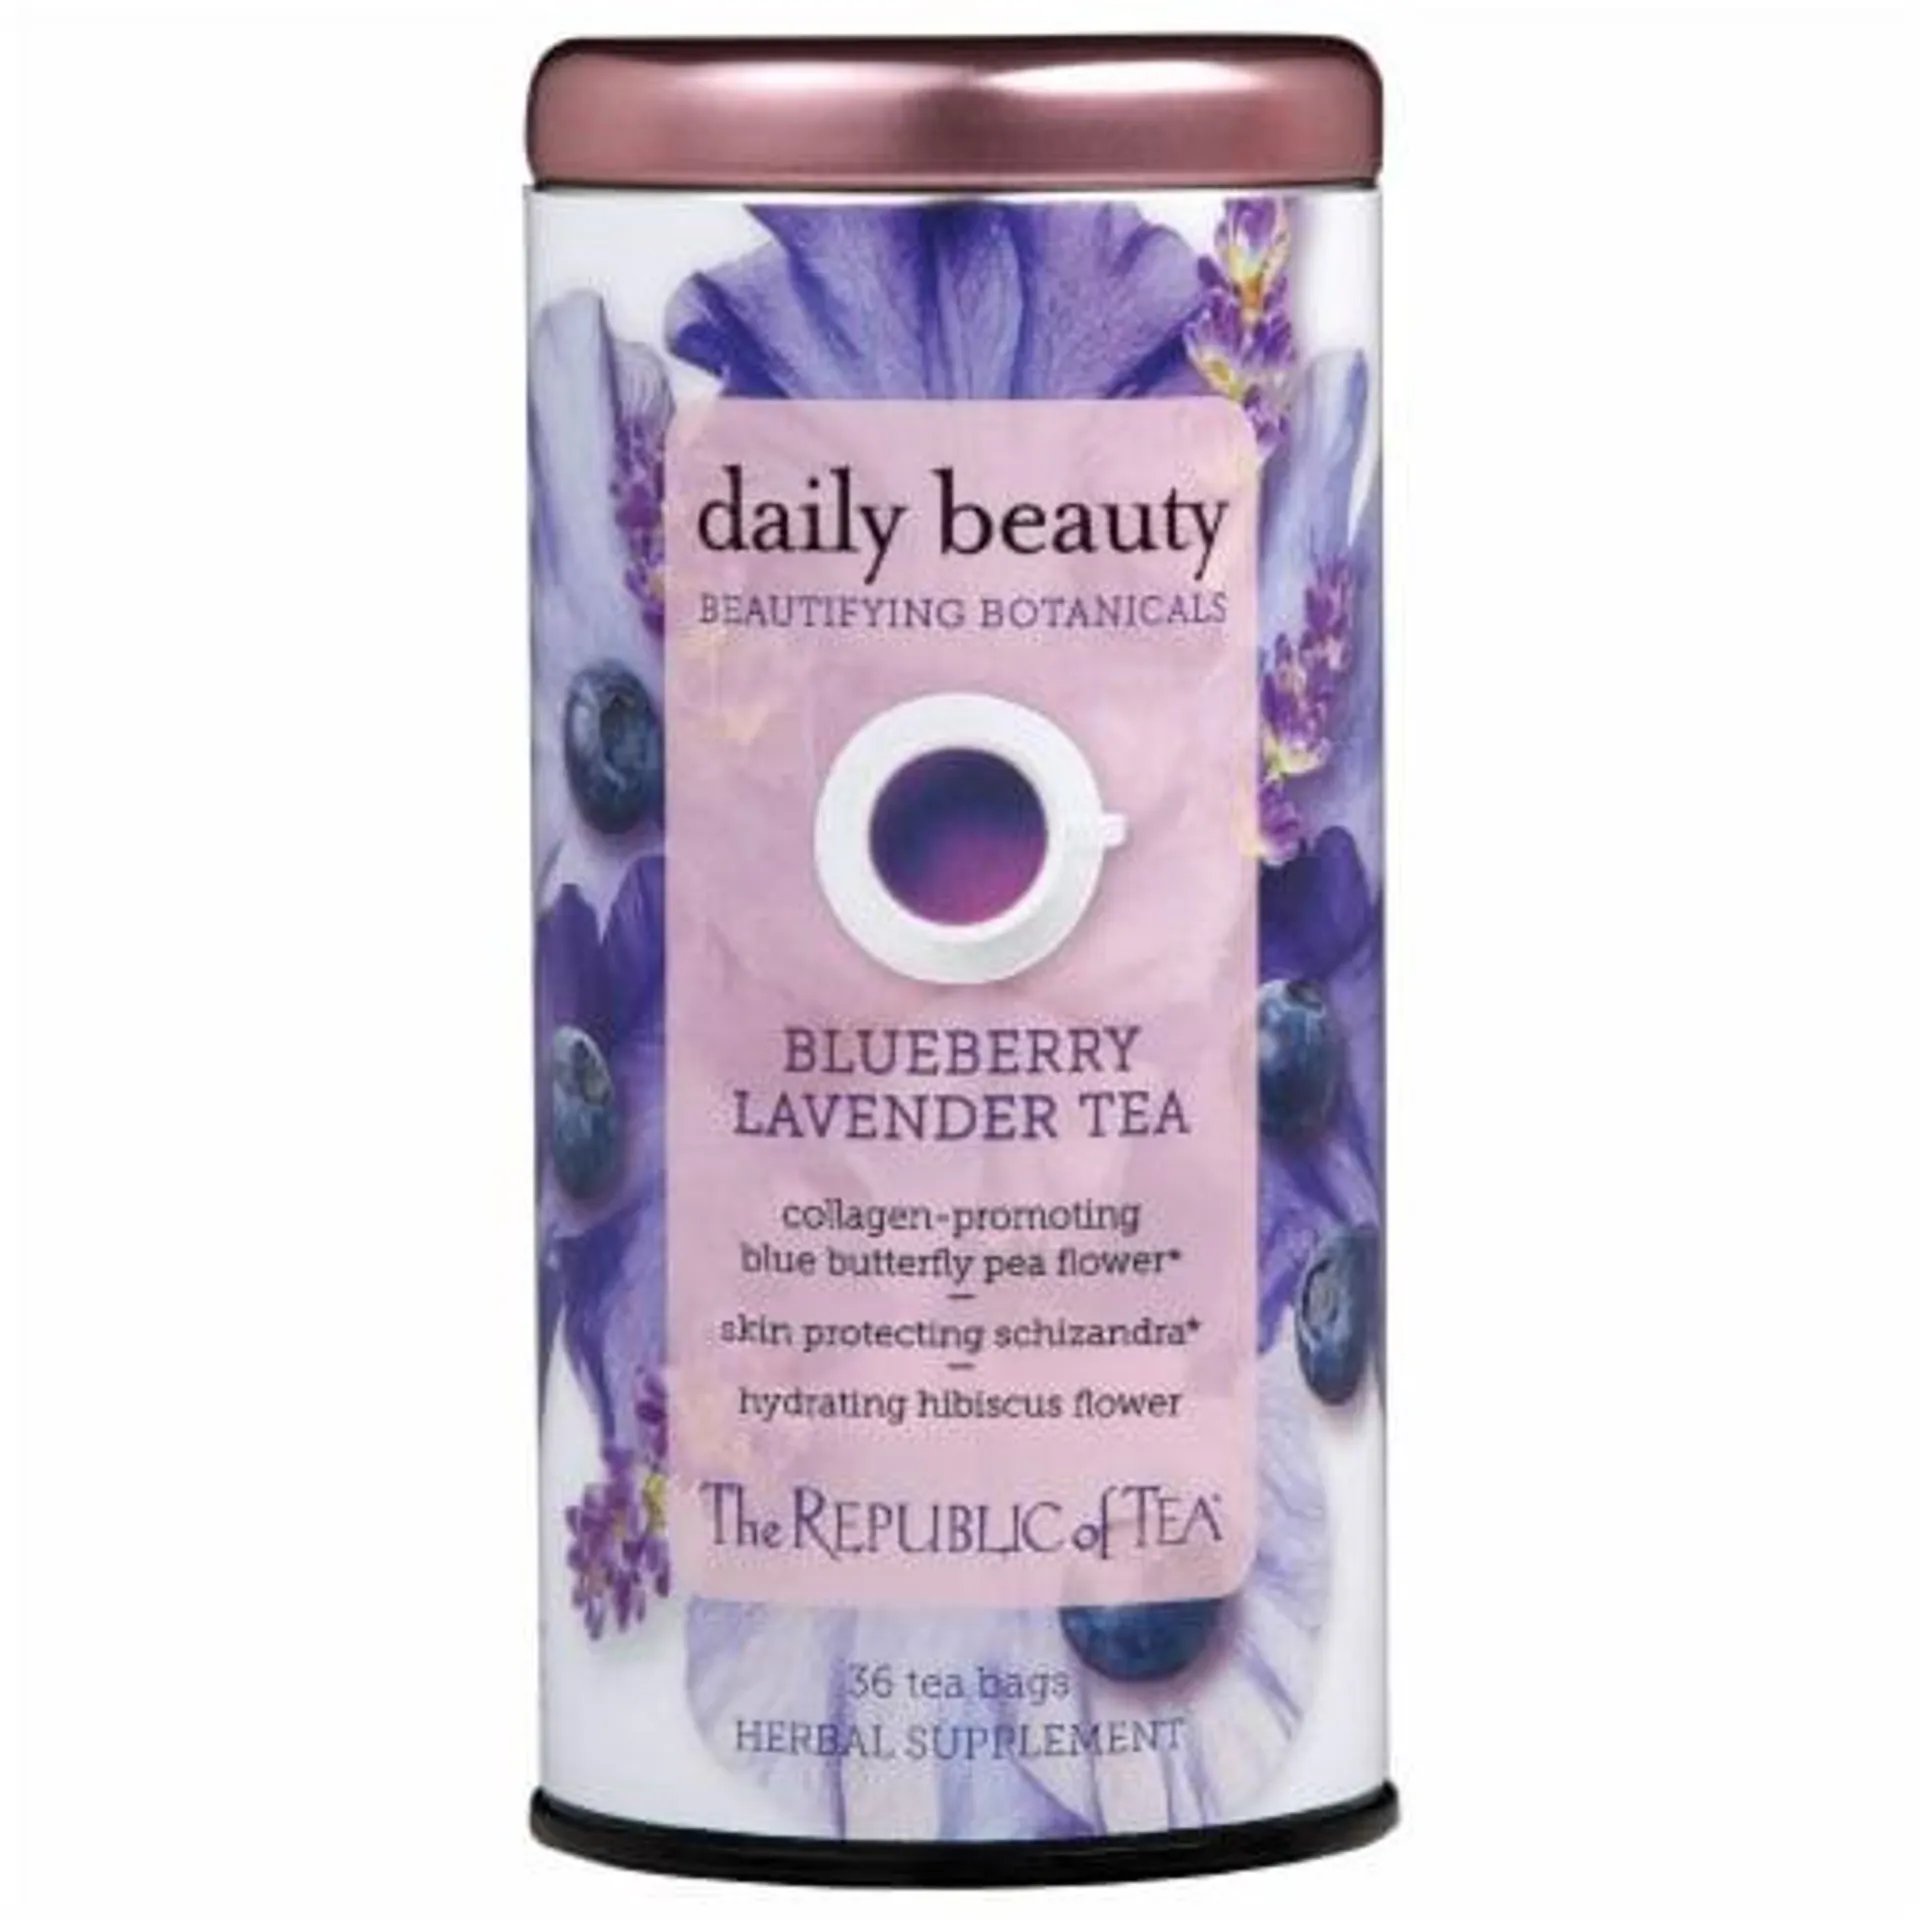 The Republic of Tea® Daily Beauty Beautifying Botanicals™ - Blueberry Lavender